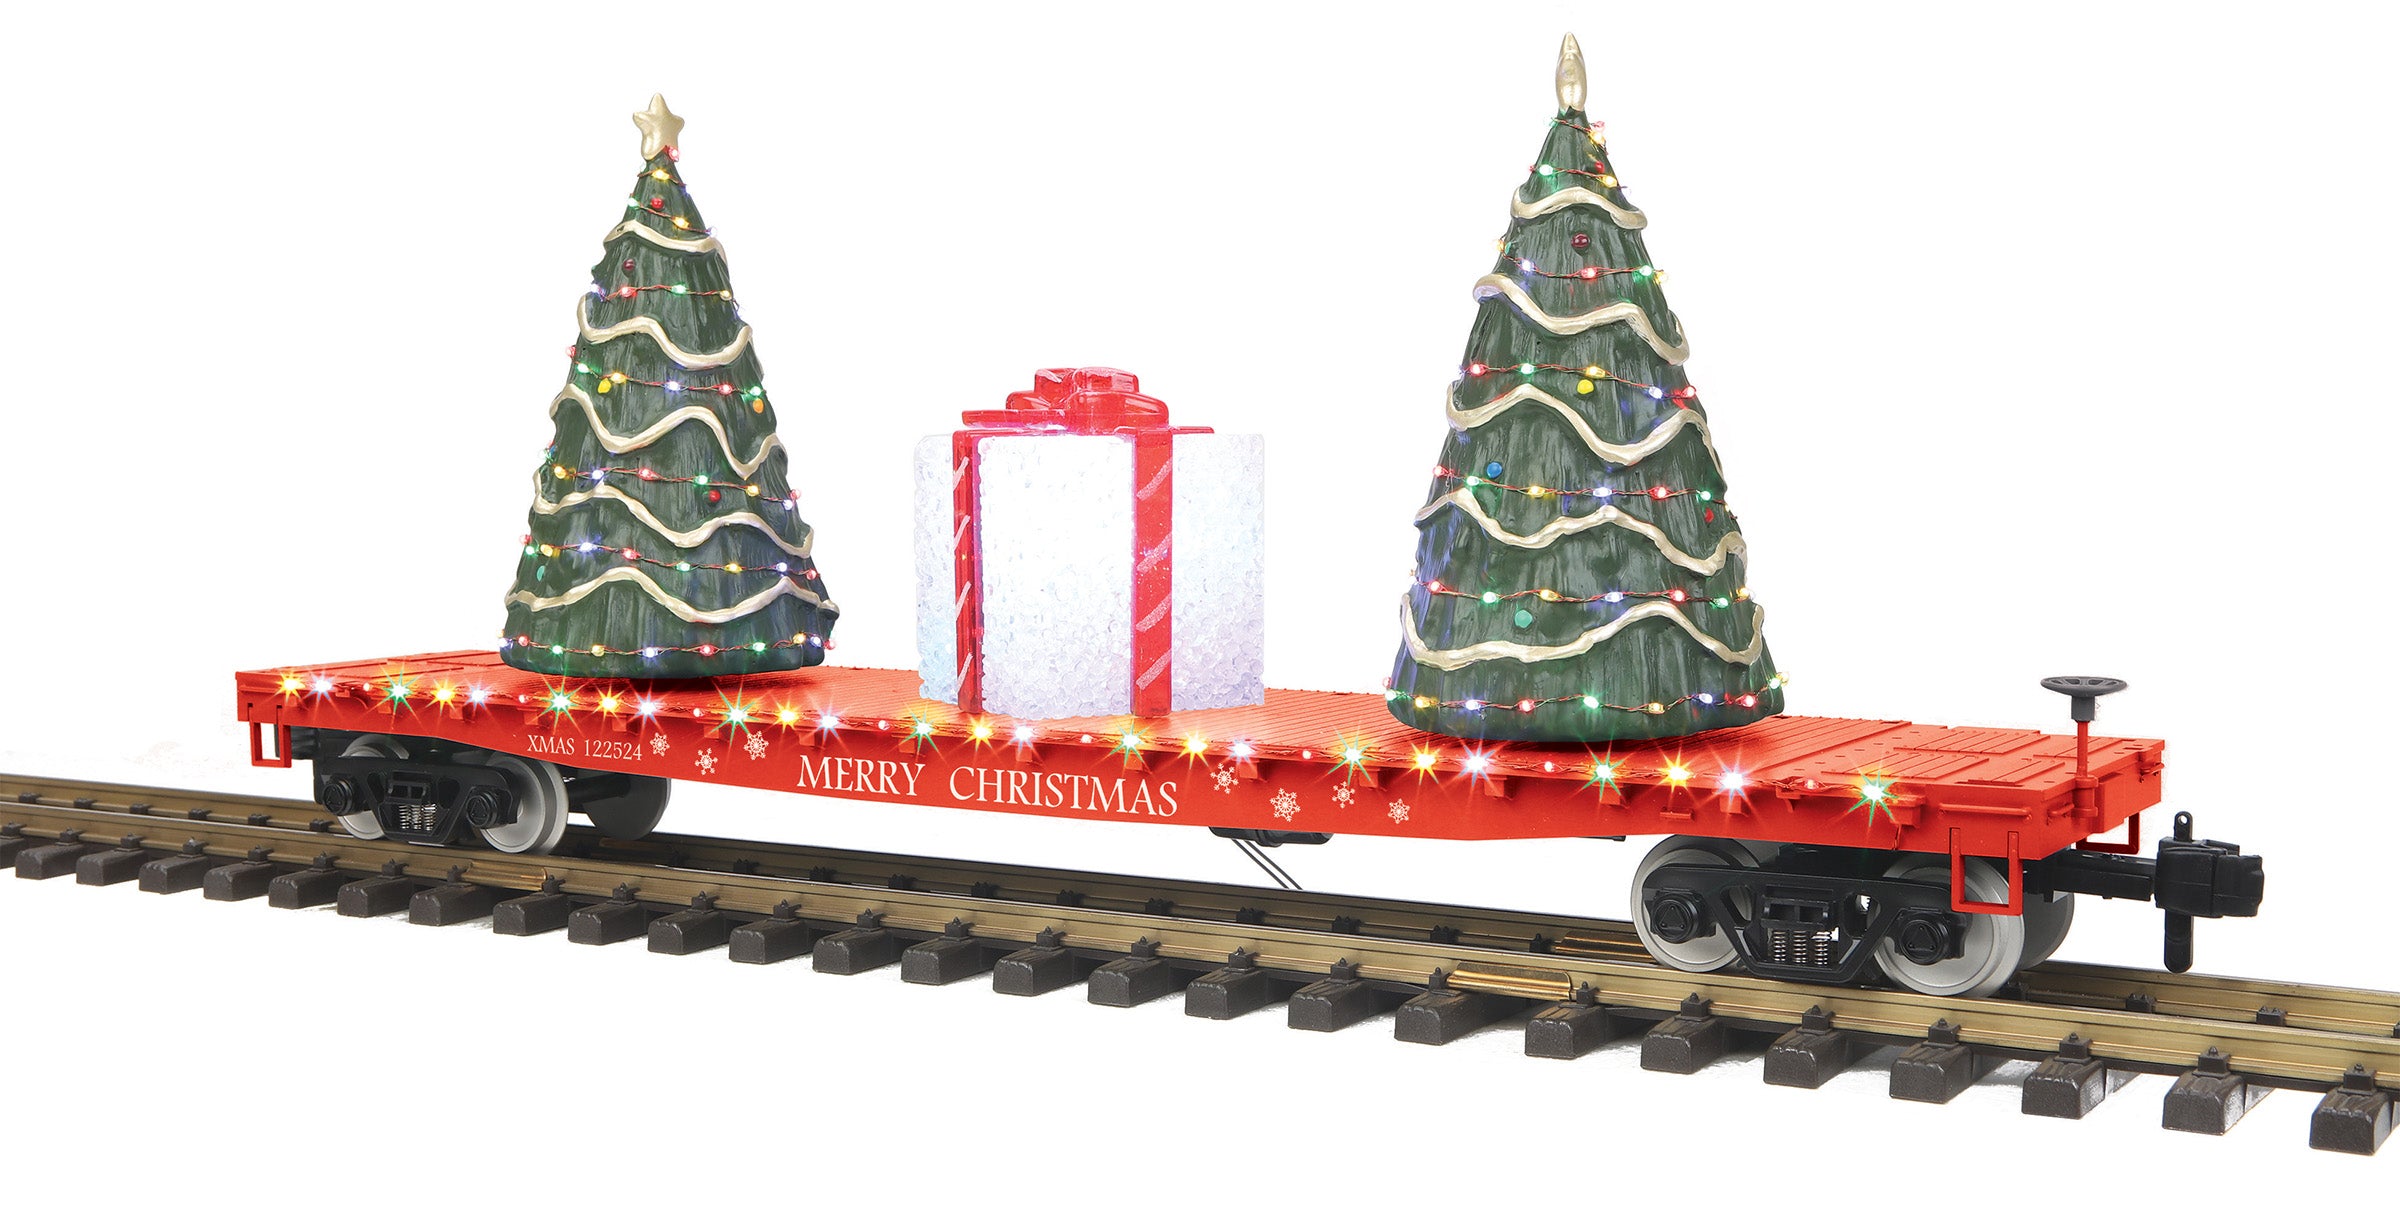 MTH 70-76067 - Flat Car "Christmas" #122524 w/ Lighted Christmas Trees (Red)